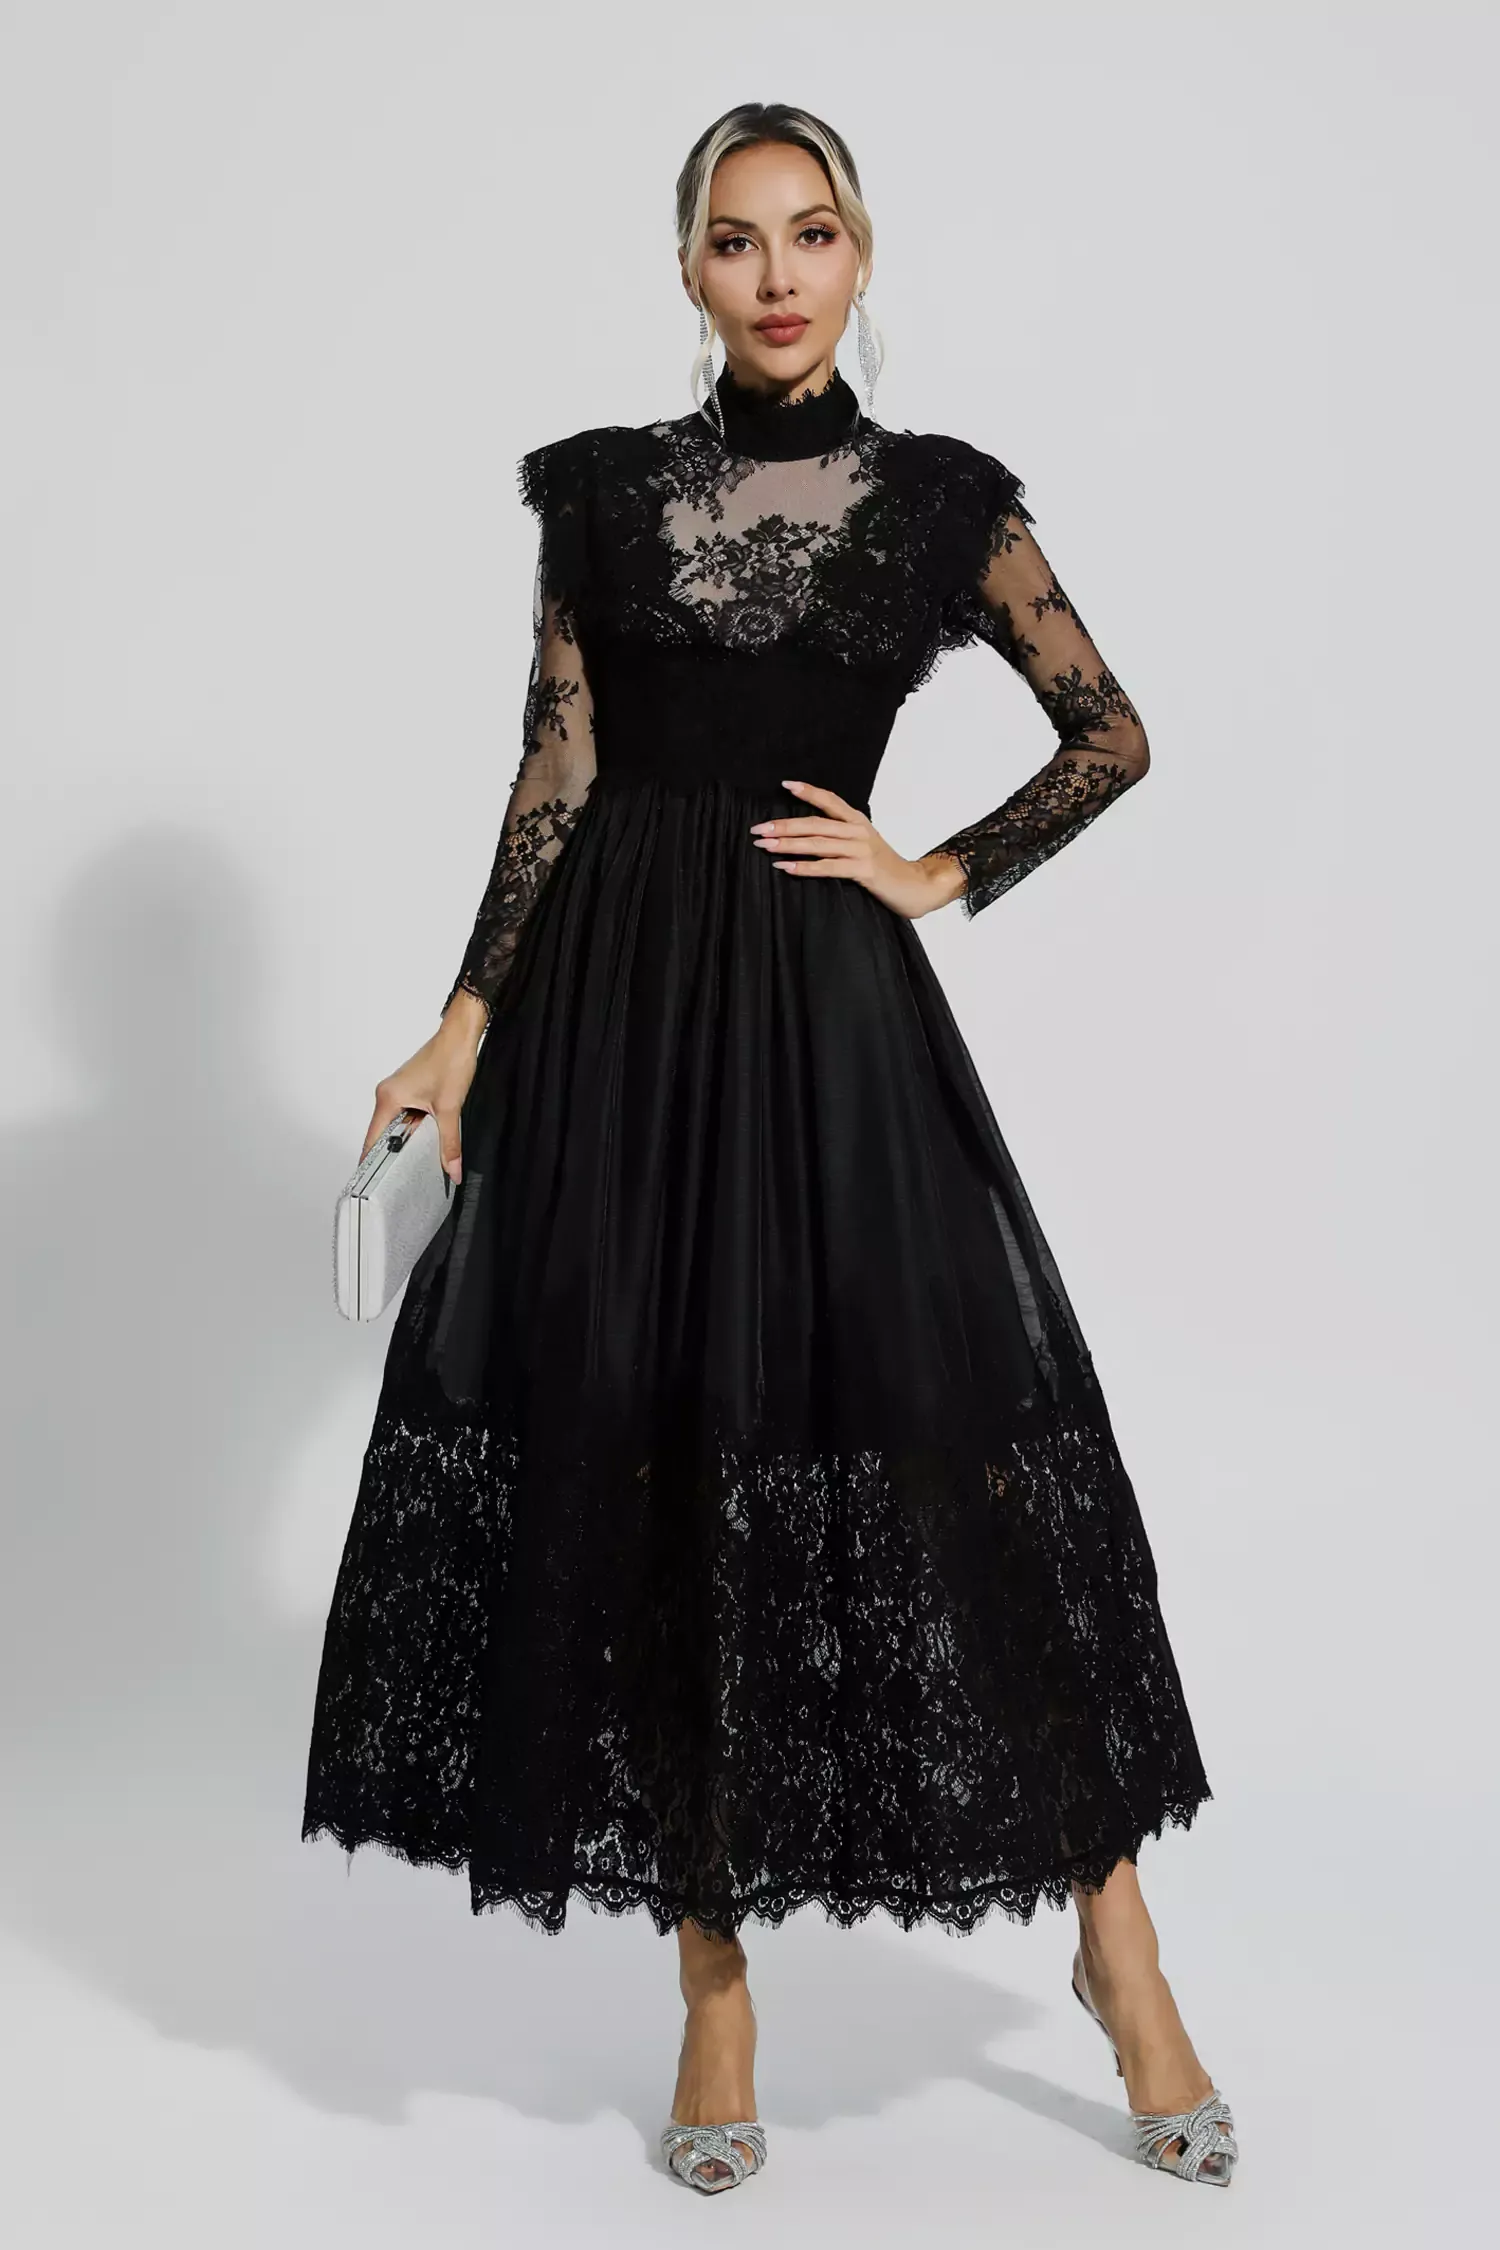 Jamie Black Floral Lace Stitching Long Sleeve Dress